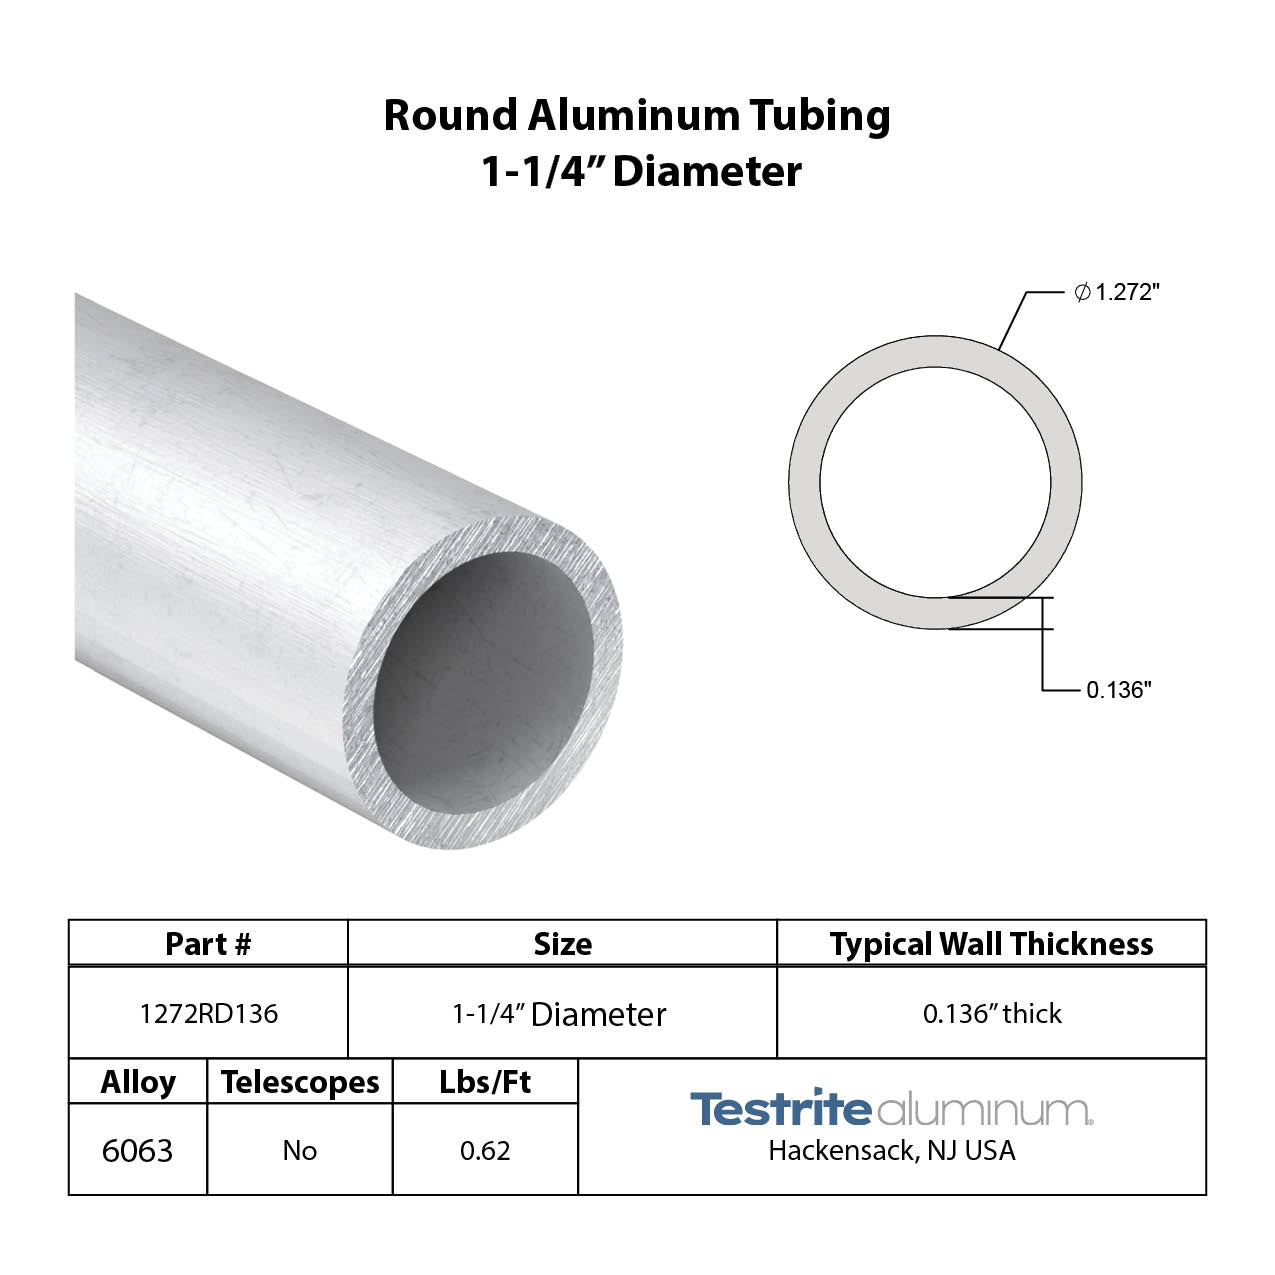 Spec sheet for approximately 1.25" x .125" Aluminum Round Tube, actual size 1.272" Diameter x .136" Wall, nearly a 1-1/4" x 1/8" Wall round aluminum tube, spec card includes lbs per ft